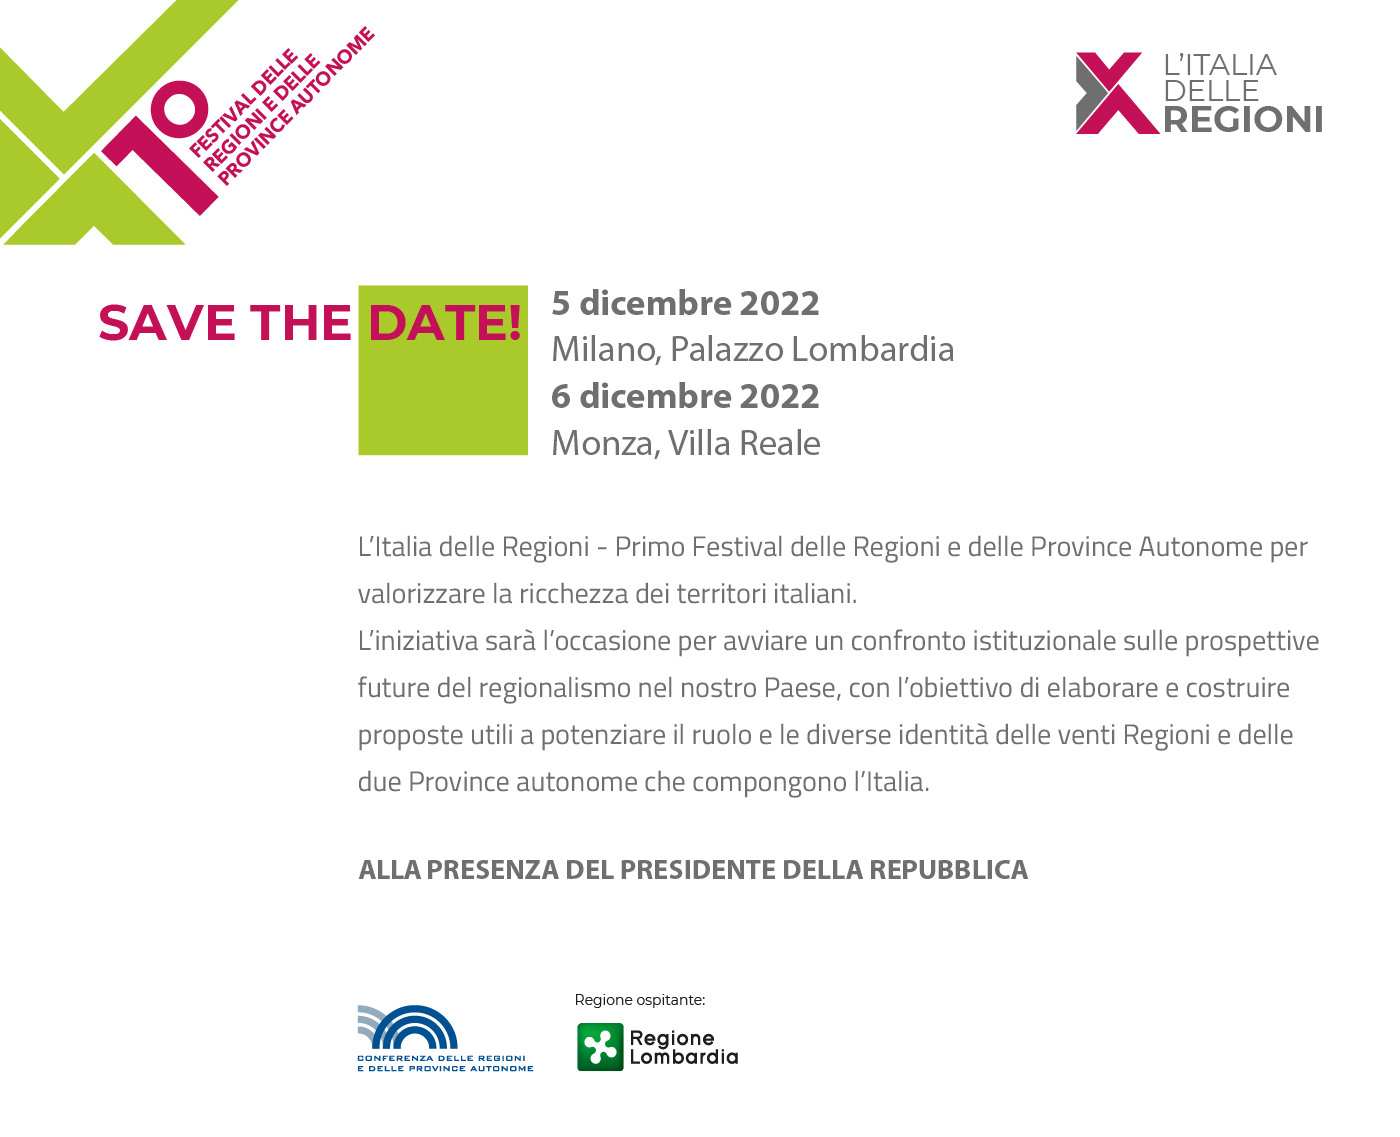 file/ELEMENTO_NEWSLETTER/24936/Save-the-date_UFFICIALE_festival_regioni_5_6_12_22_NL.png